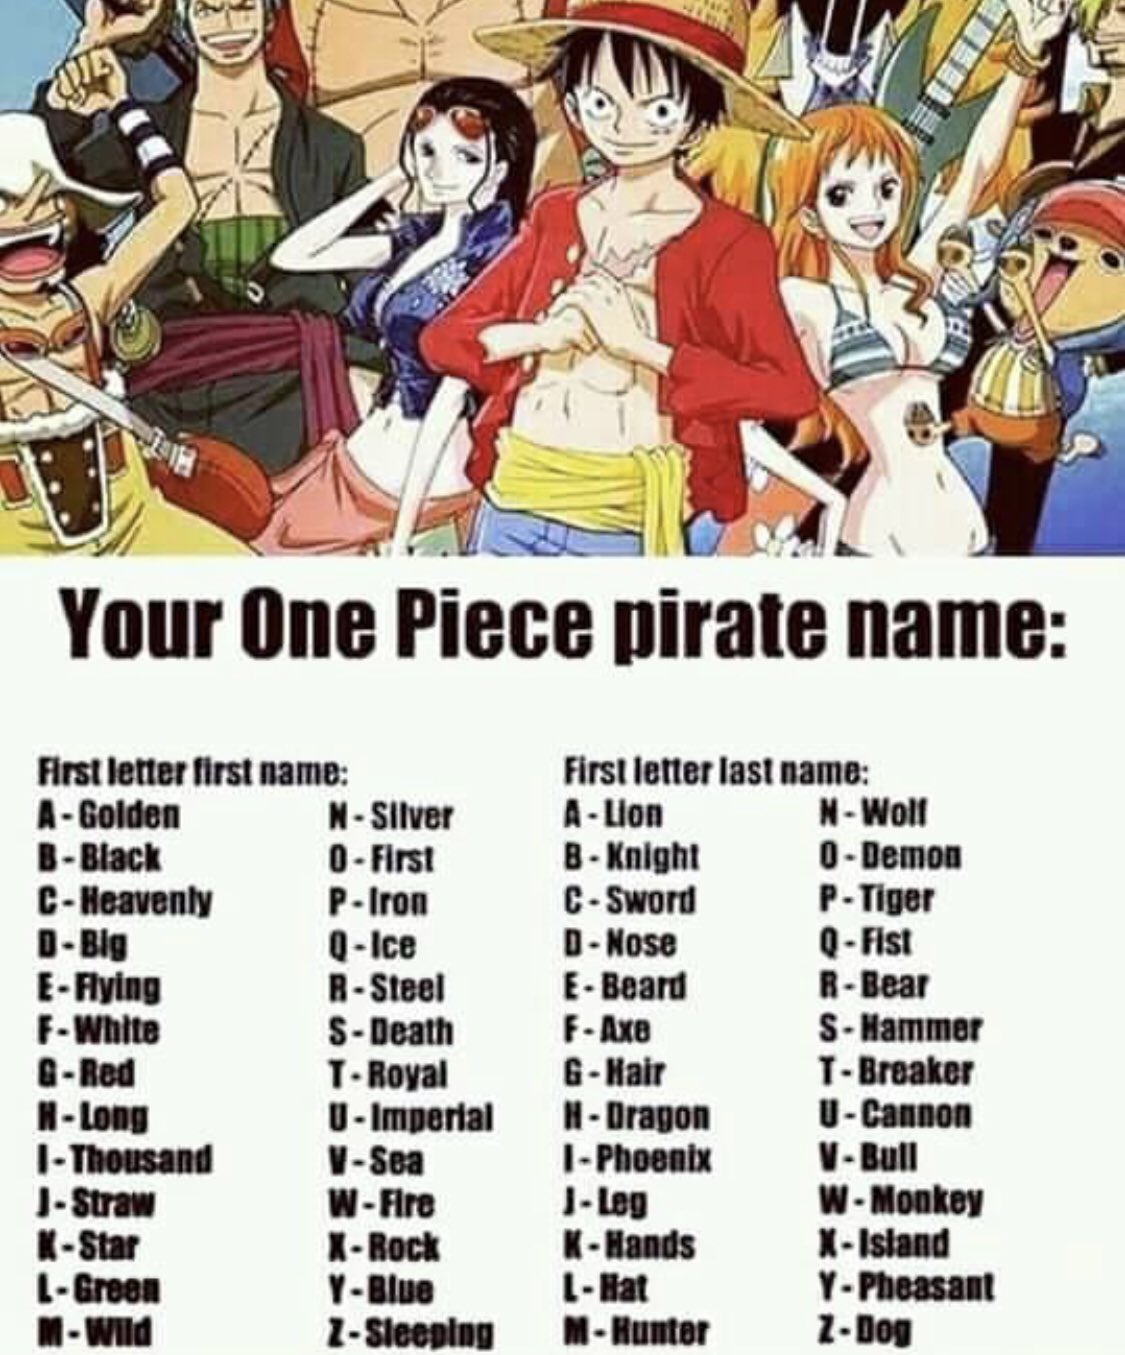 What's Your Anime Name? 